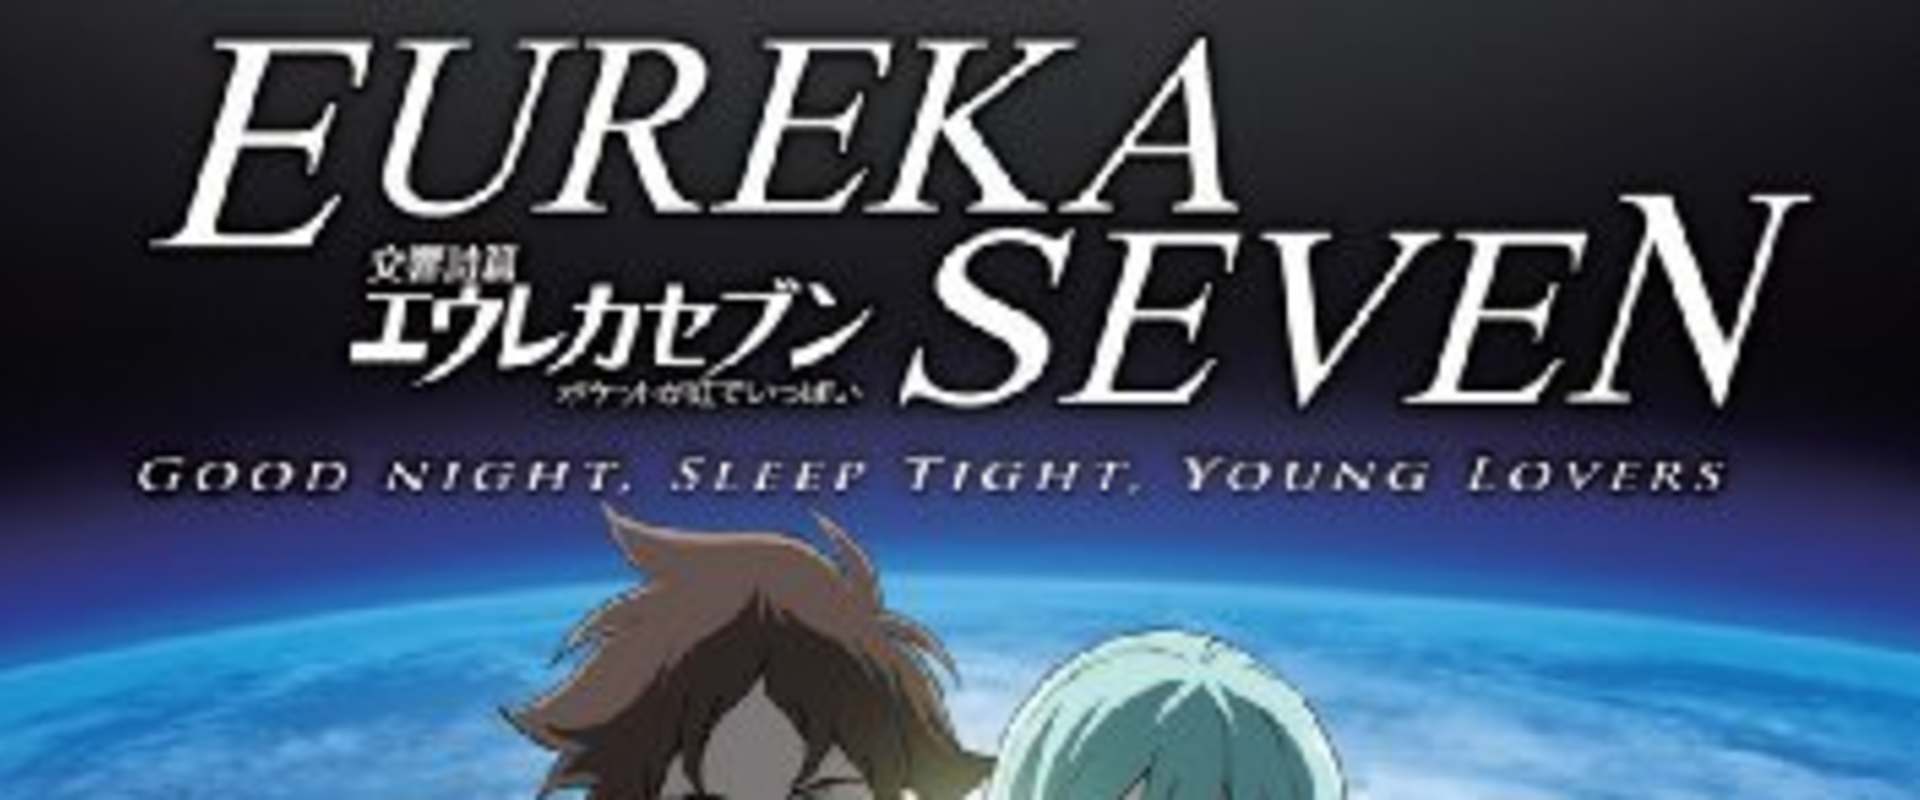 Psalms of Planets Eureka Seven: Good Night, Sleep Tight, Young Lovers background 2